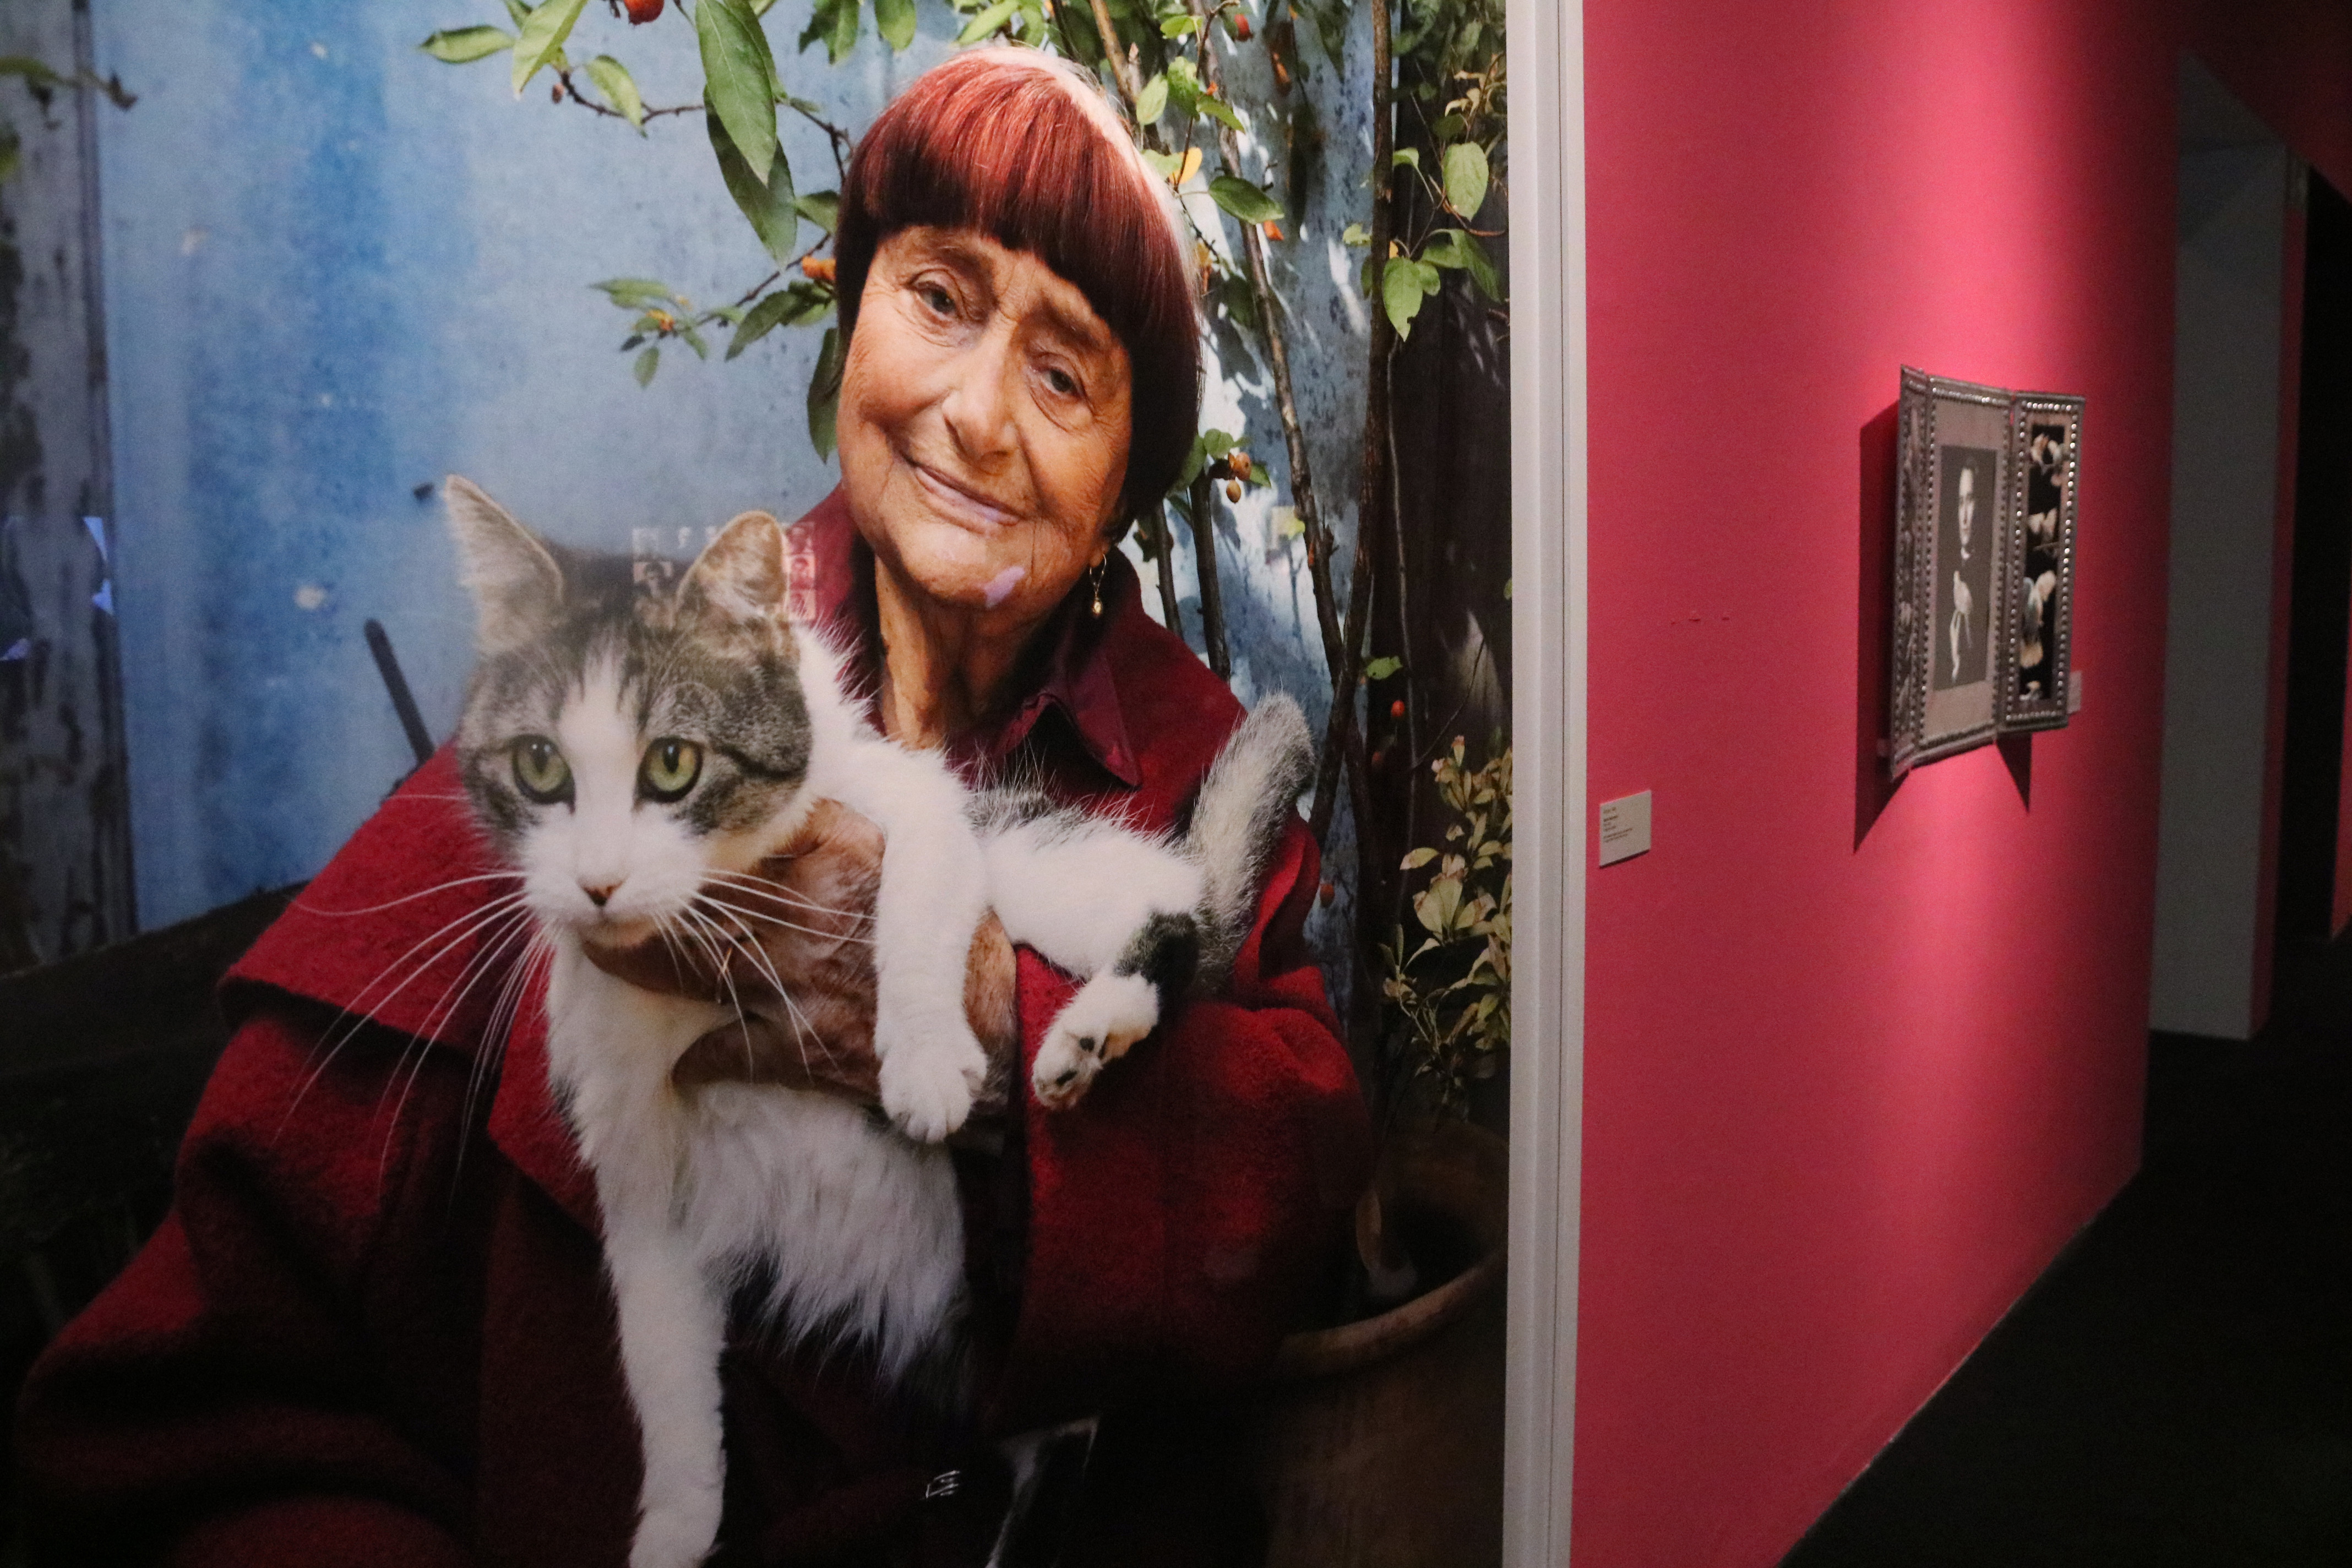 Agnès Varda in an image from the CCCB exhibition 'Agnès Varda: Photographing, Filming, Recycling'